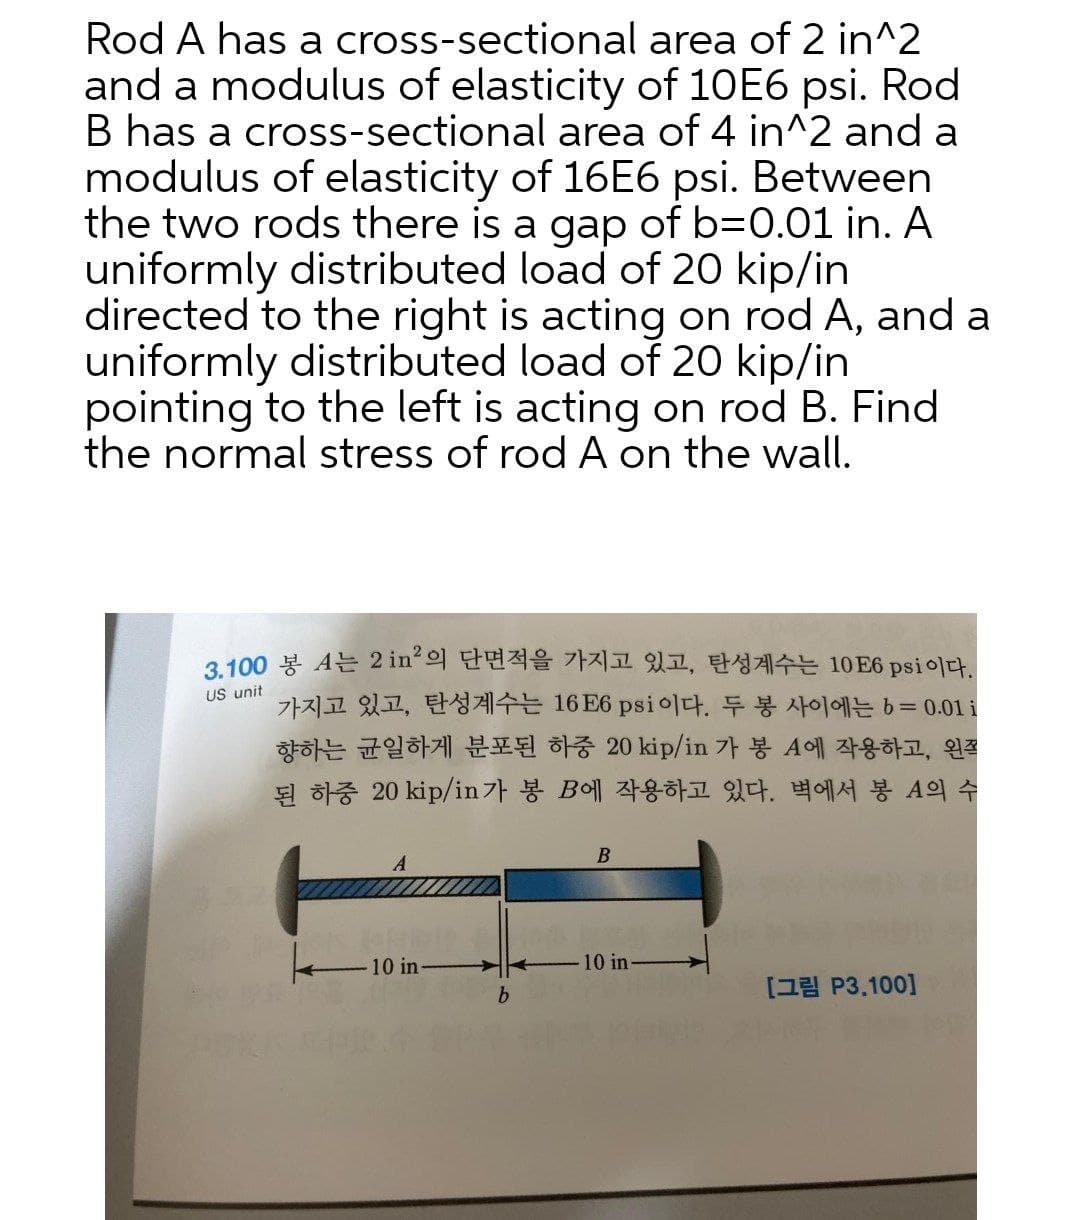 Rod A has a cross-sectional area of 2 in^2
and a modulus of elasticity of 10E6 psi. Rod
B has a cross-sectional area of 4 in^2 and a
modulus of elasticity of 16E6 psi. Between
the two rods there is a gap of b=0.01 in. A
uniformly distributed load of 20 kip/in
directed to the right is acting on rod A, and a
uniformly distributed load of 20 kip/in
pointing to the left is acting on rod B. Find
the normal stress of rod A on the wall.
3100 봉 A는 2 in'의 단면적을 가지고 있고, 탄성계수는 10E6 psi 이다.
US unit
가지고 있고, 탄성계수는 16 E6 psi이다. 두 봉 사이에는 63D0.01 1
향하는 균일하게 분포된 하중 20kip/in 가 봉 A에 작용하고, 왼쪽
된 하중 20kip/in가 봉 B에 작용하고 있다. 벽에서 봉 A의 수
B
10 in
10 in-
b.
[그림 P3.100]
